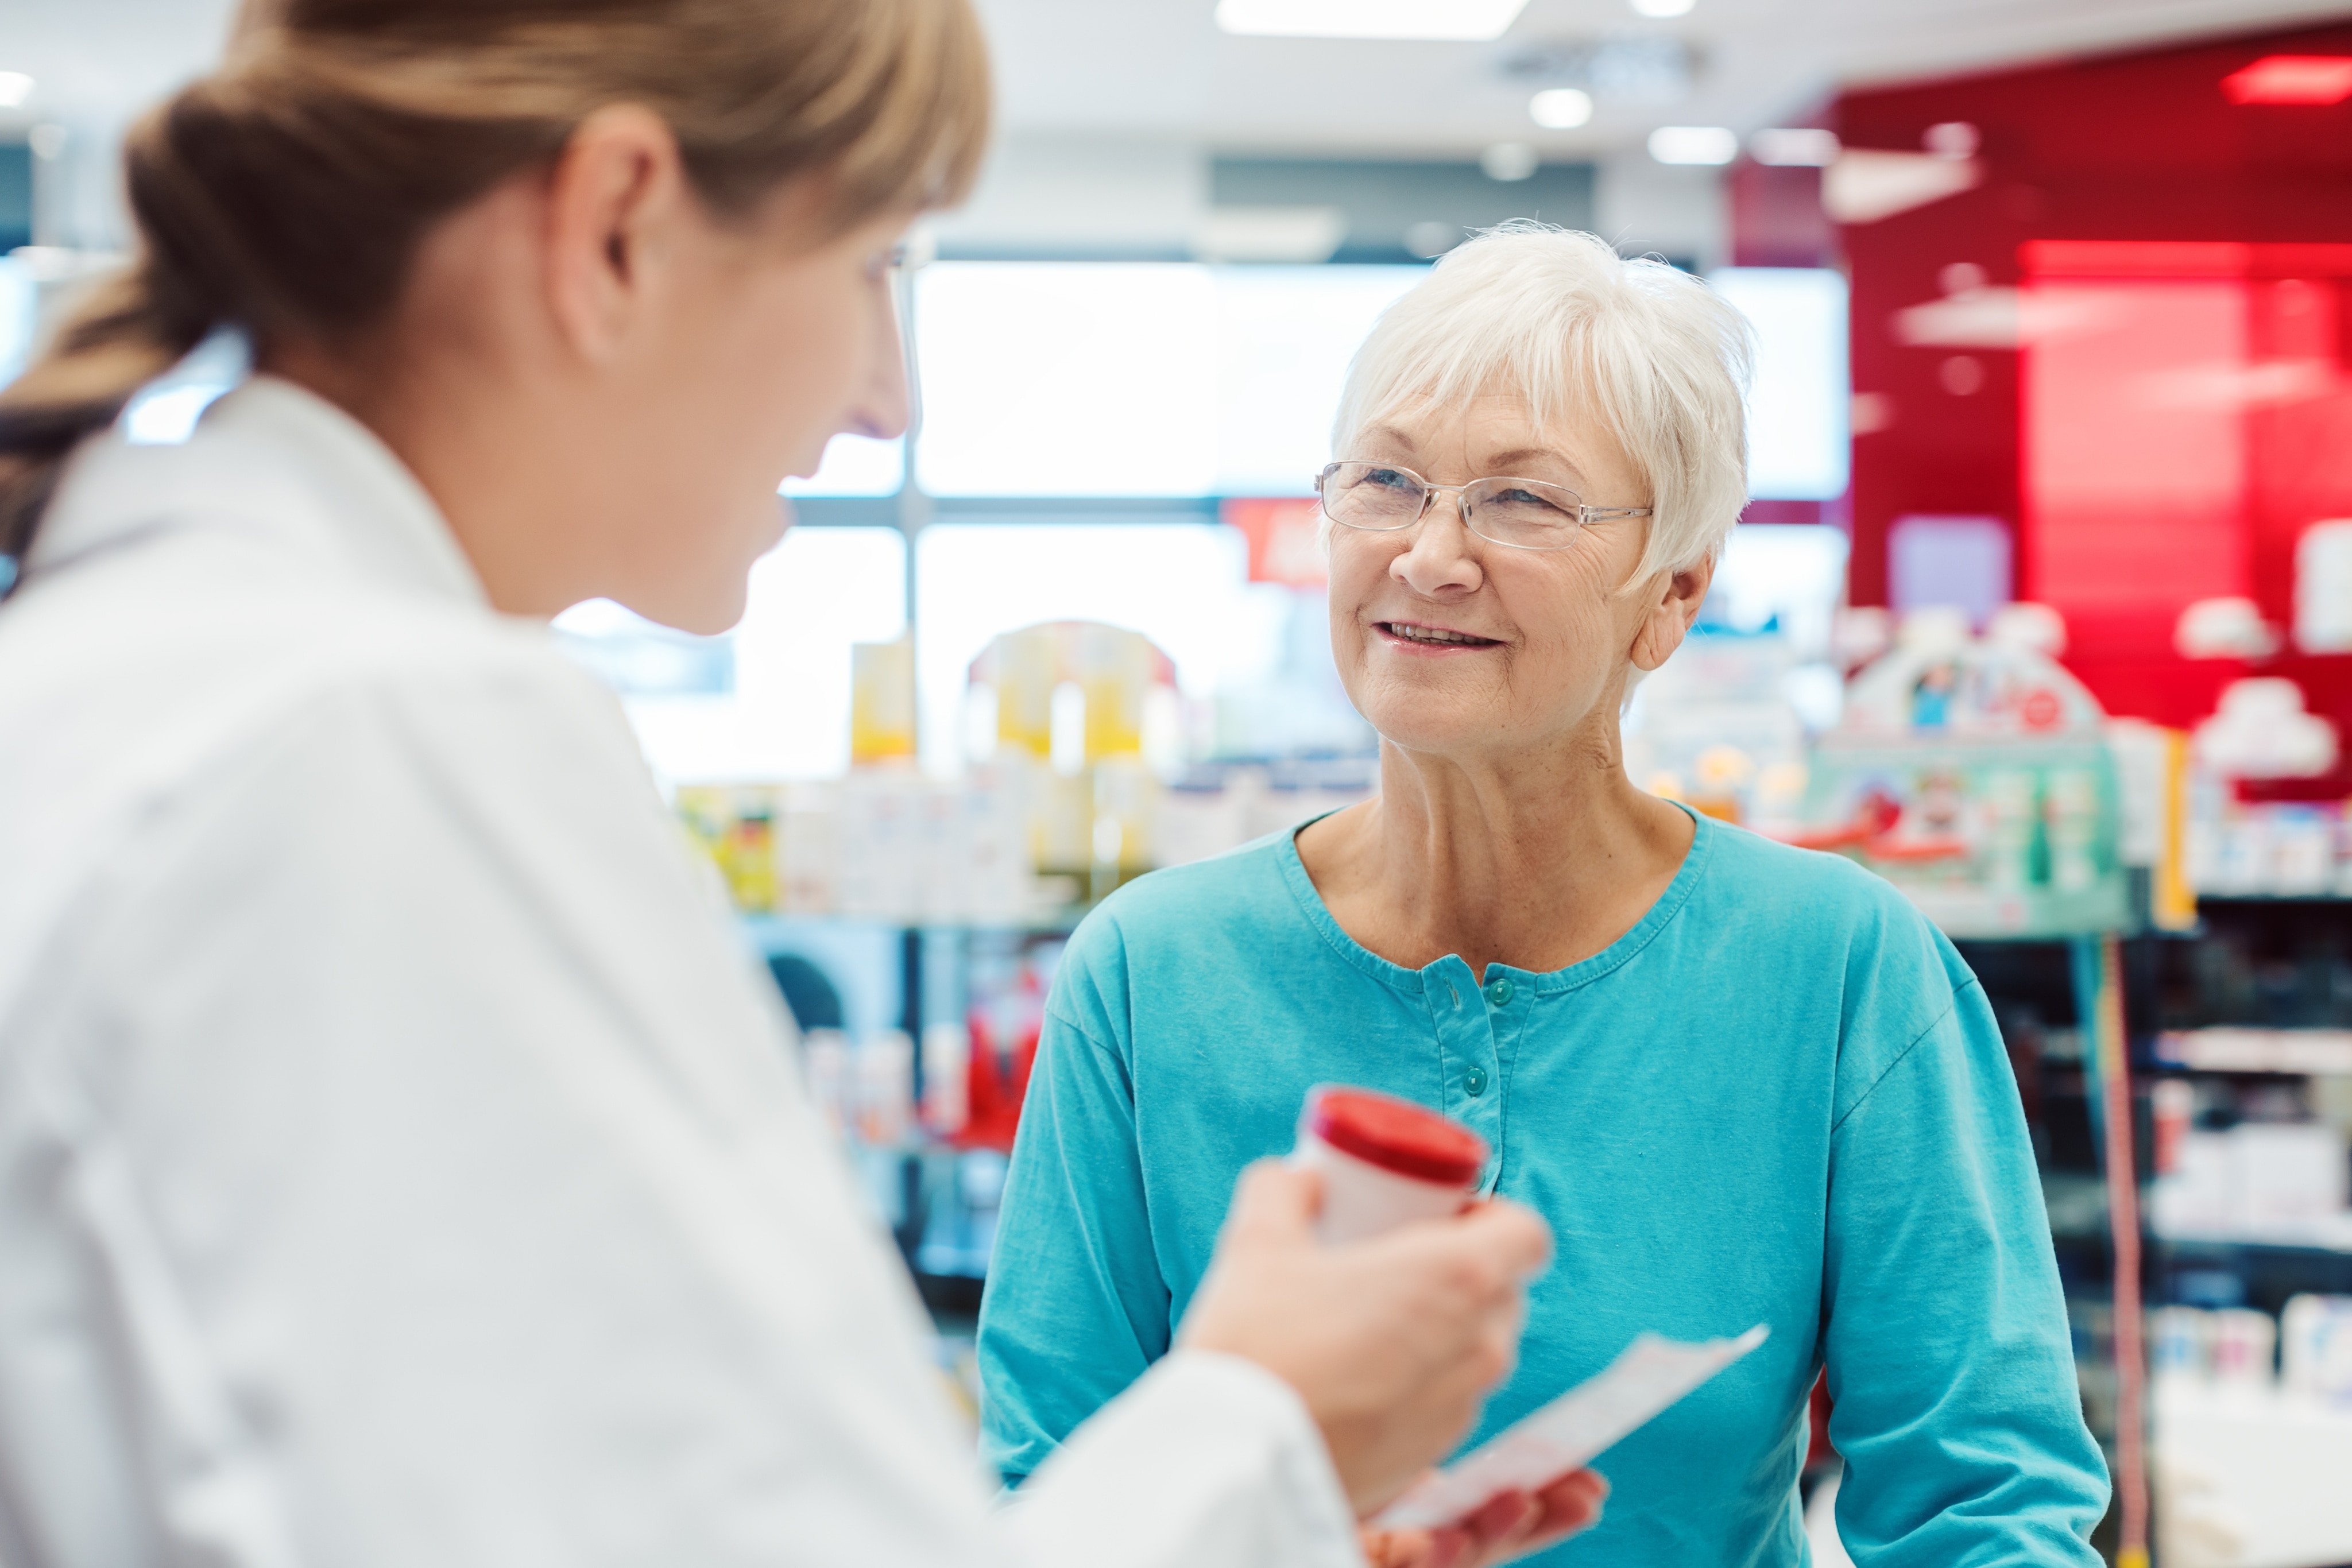 A pharmacist is handing an older woman a bottle of pills in a pharmacy. The older woman is looking attentive and smiling. 